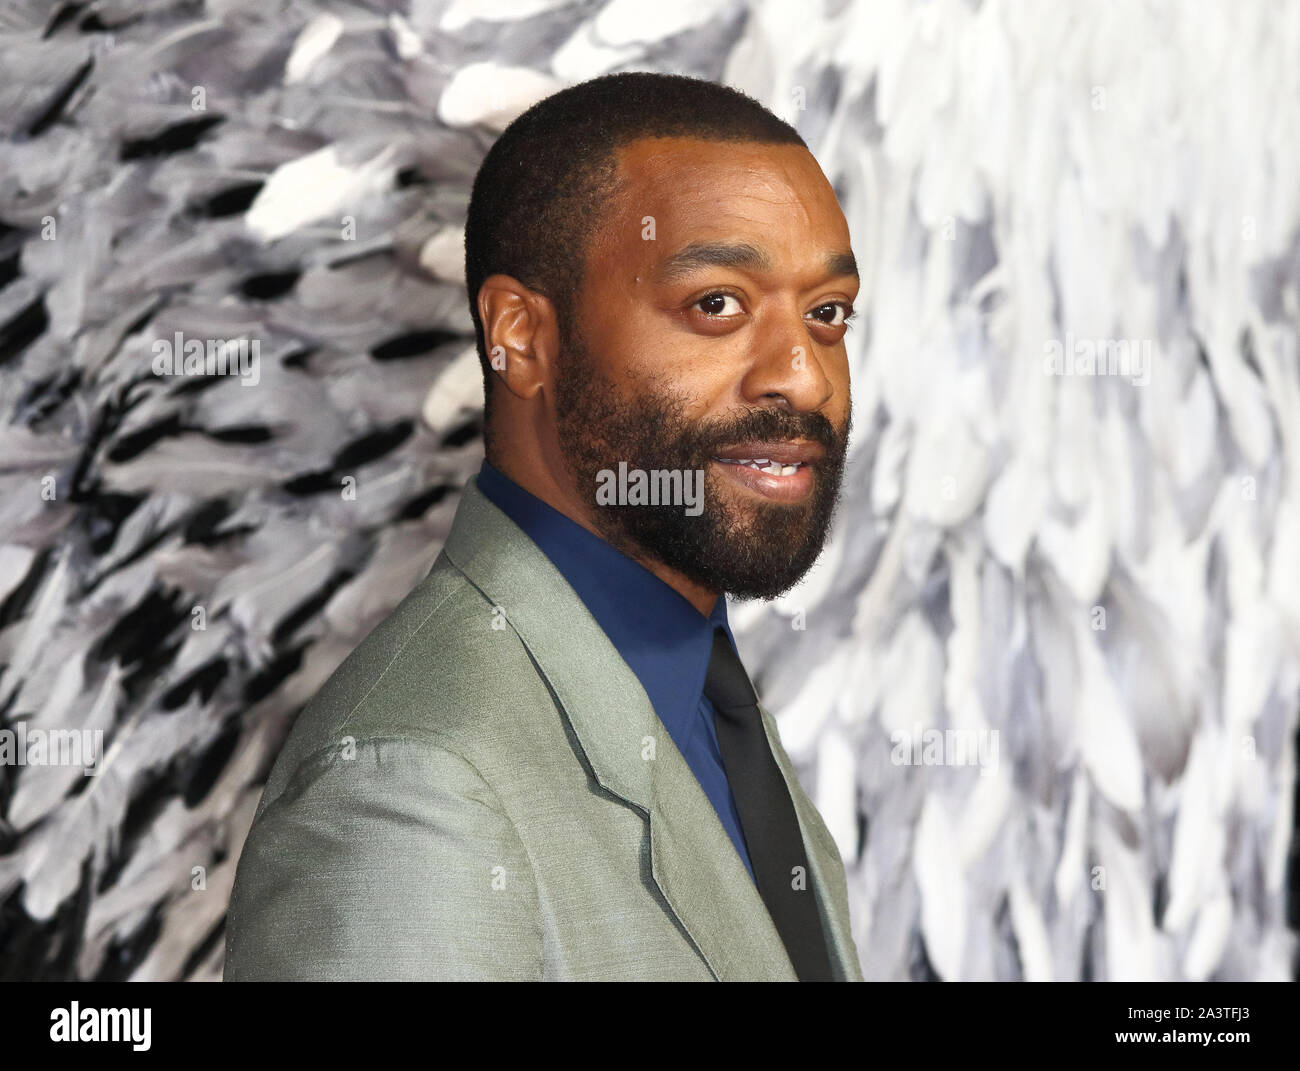 Chiwetel Ejiofor attends the Maleficent: Mistress of Evil European Film Premiere at the Odeon IMAX Waterloo in London. Stock Photo